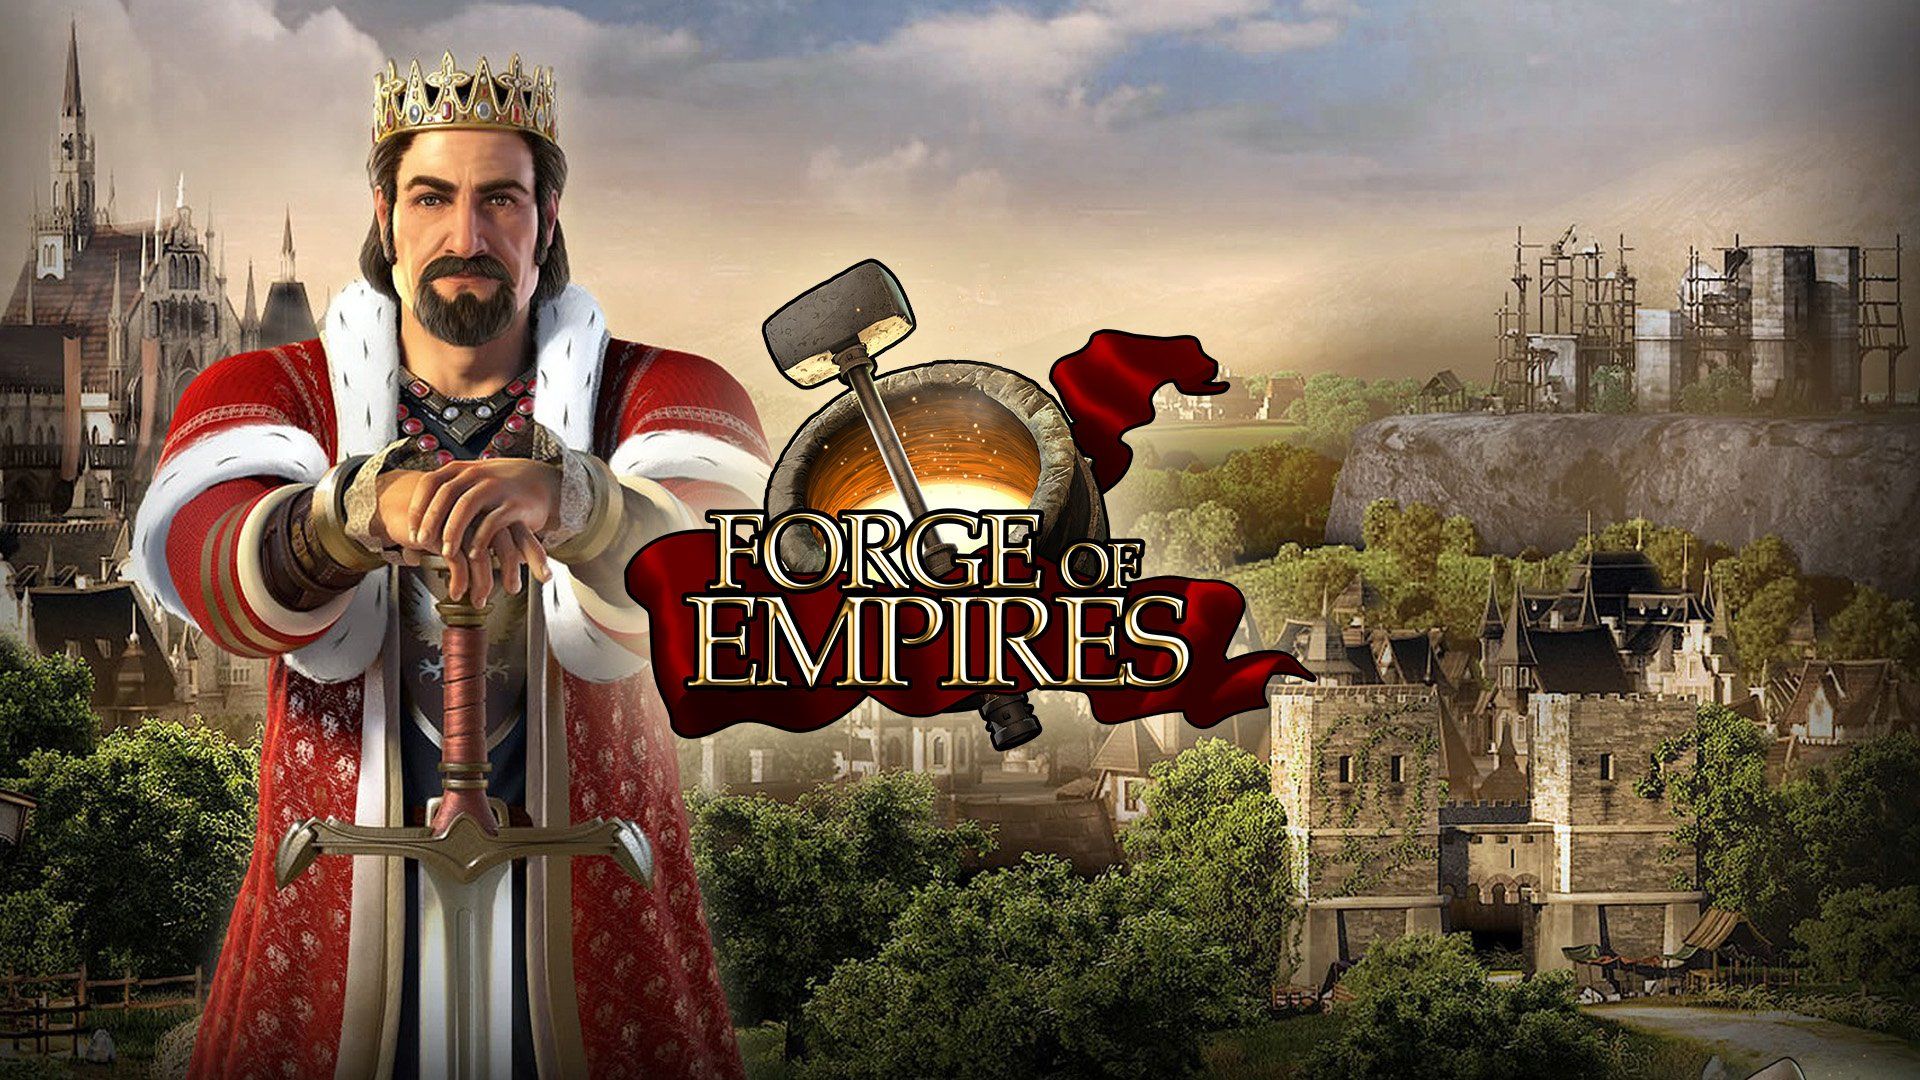 forge, Of, Empires, Online, Fantasy, Strategy, 1fempires, Building, City, Cities, Adventure, History, Poster Wallpaper HD / Desktop and Mobile Background